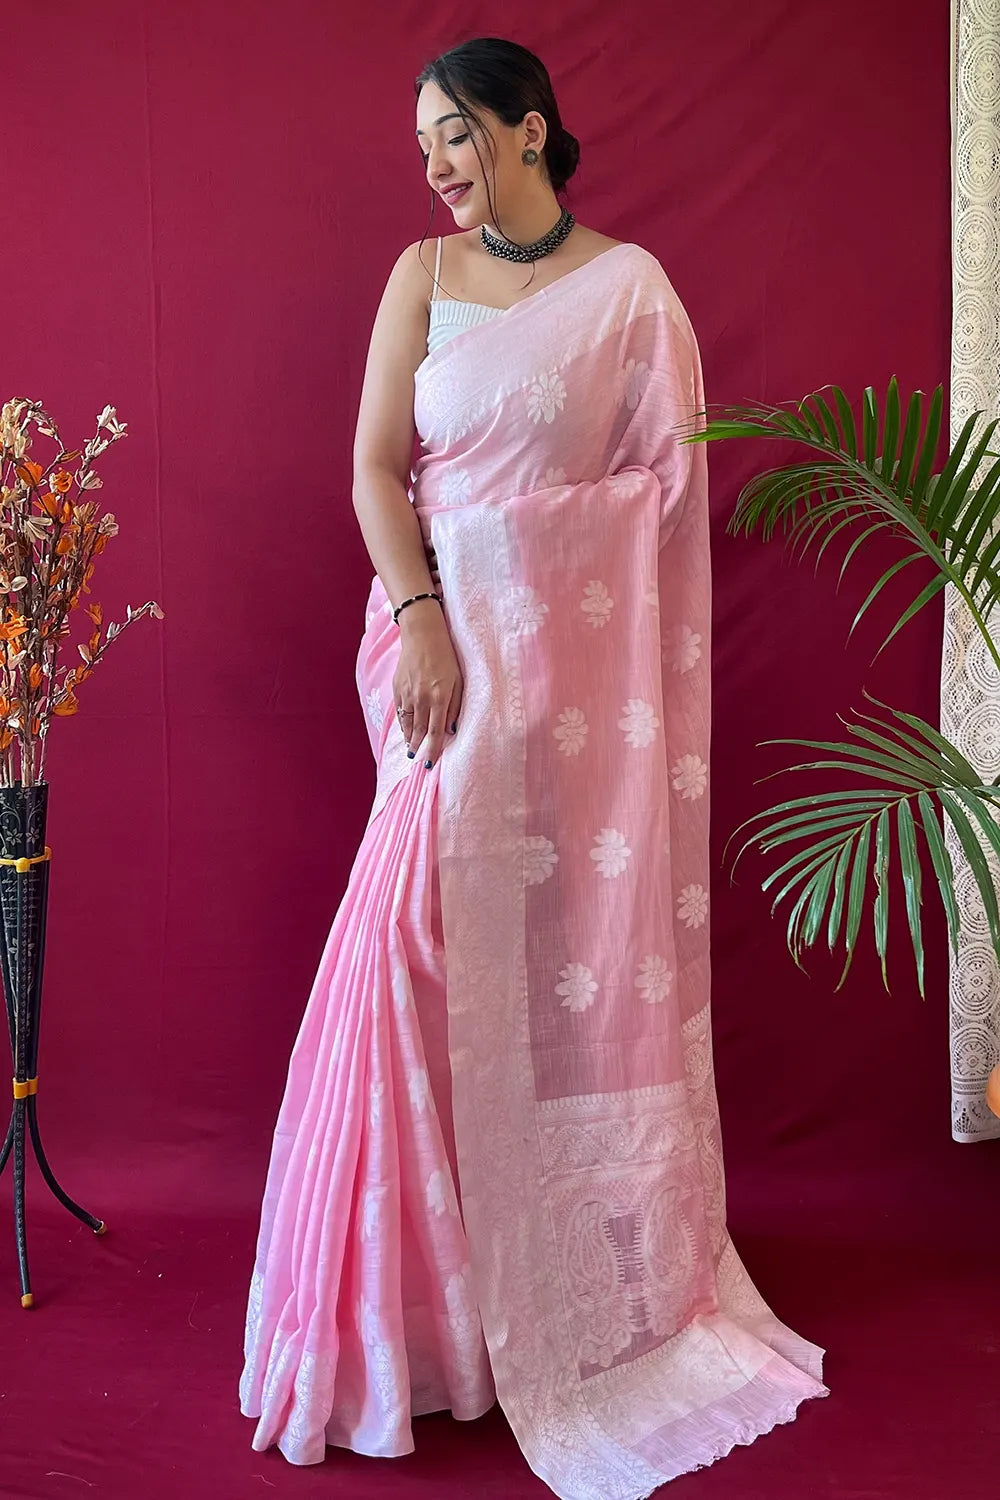 Ready To Wear Saree - Buy Pre-Stitched Sarees Online | Me99